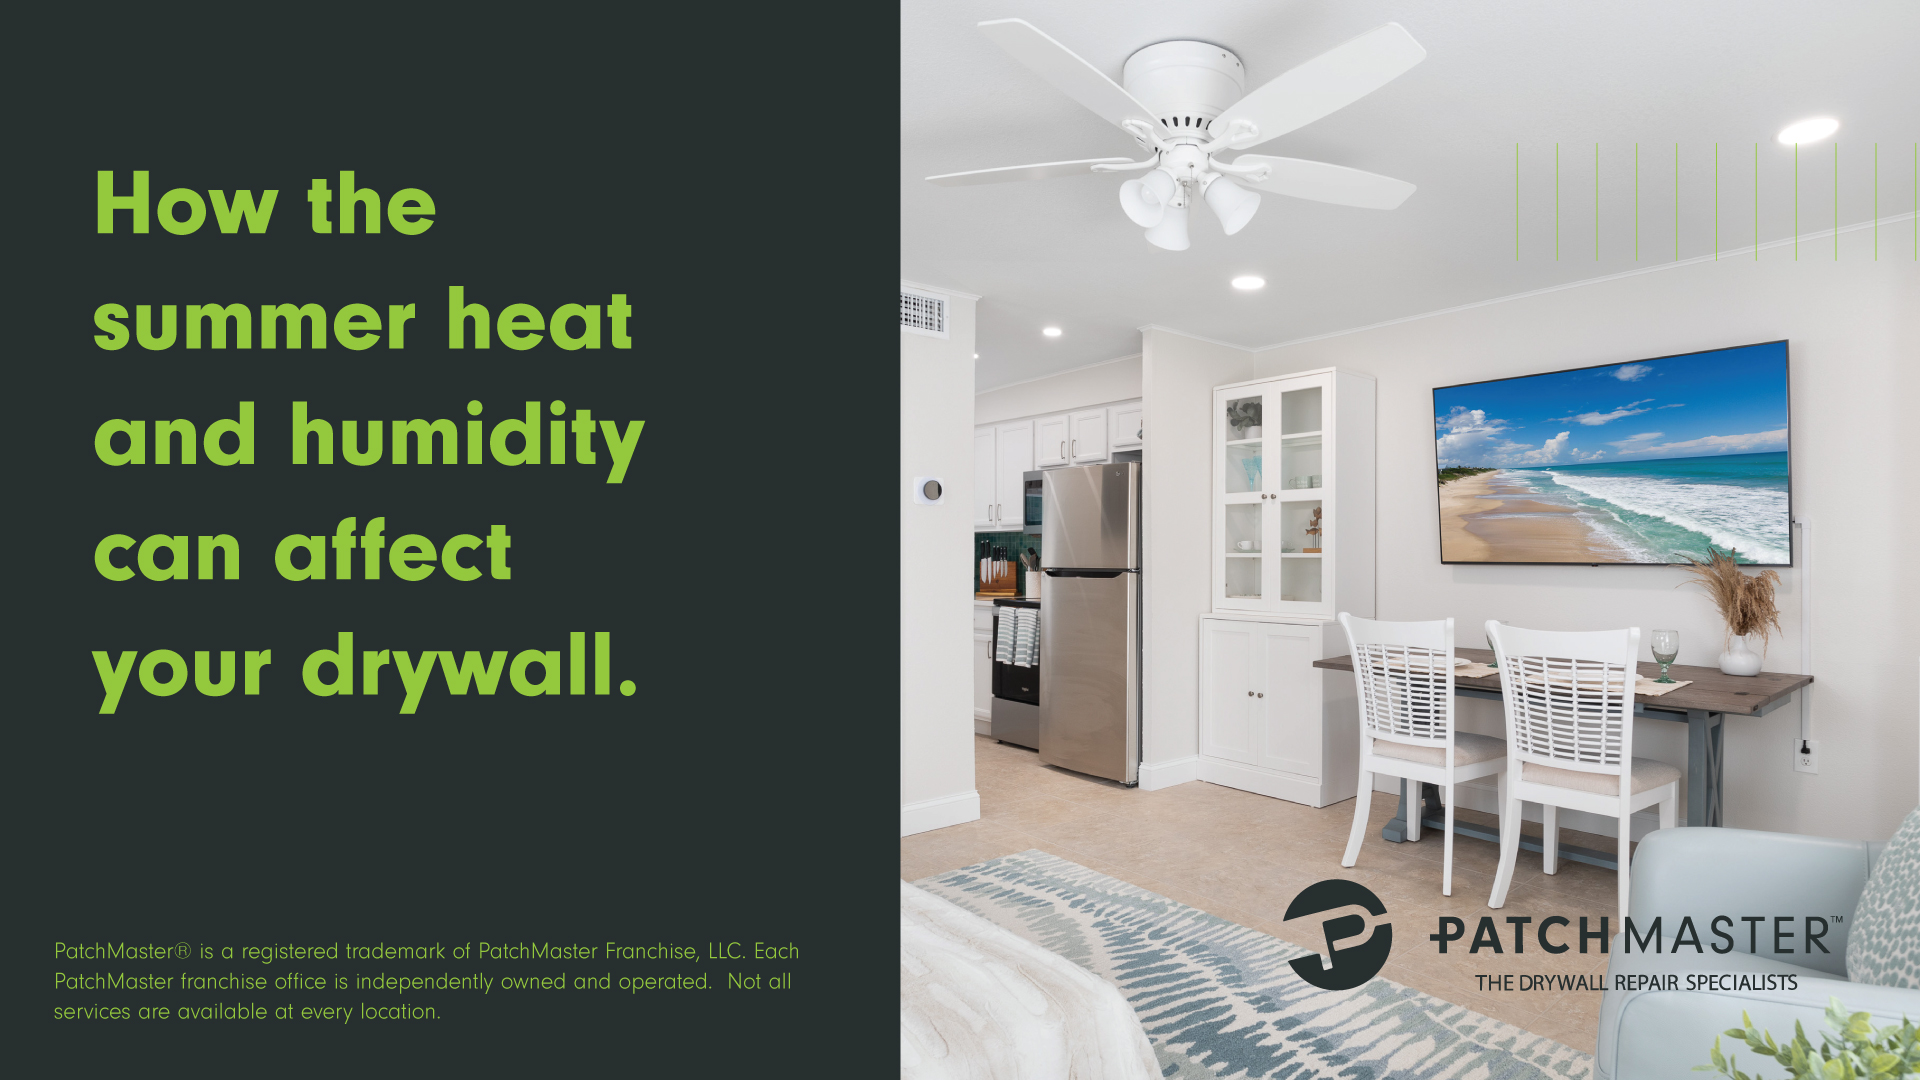 How the summer heat and humidity can affect your drywall